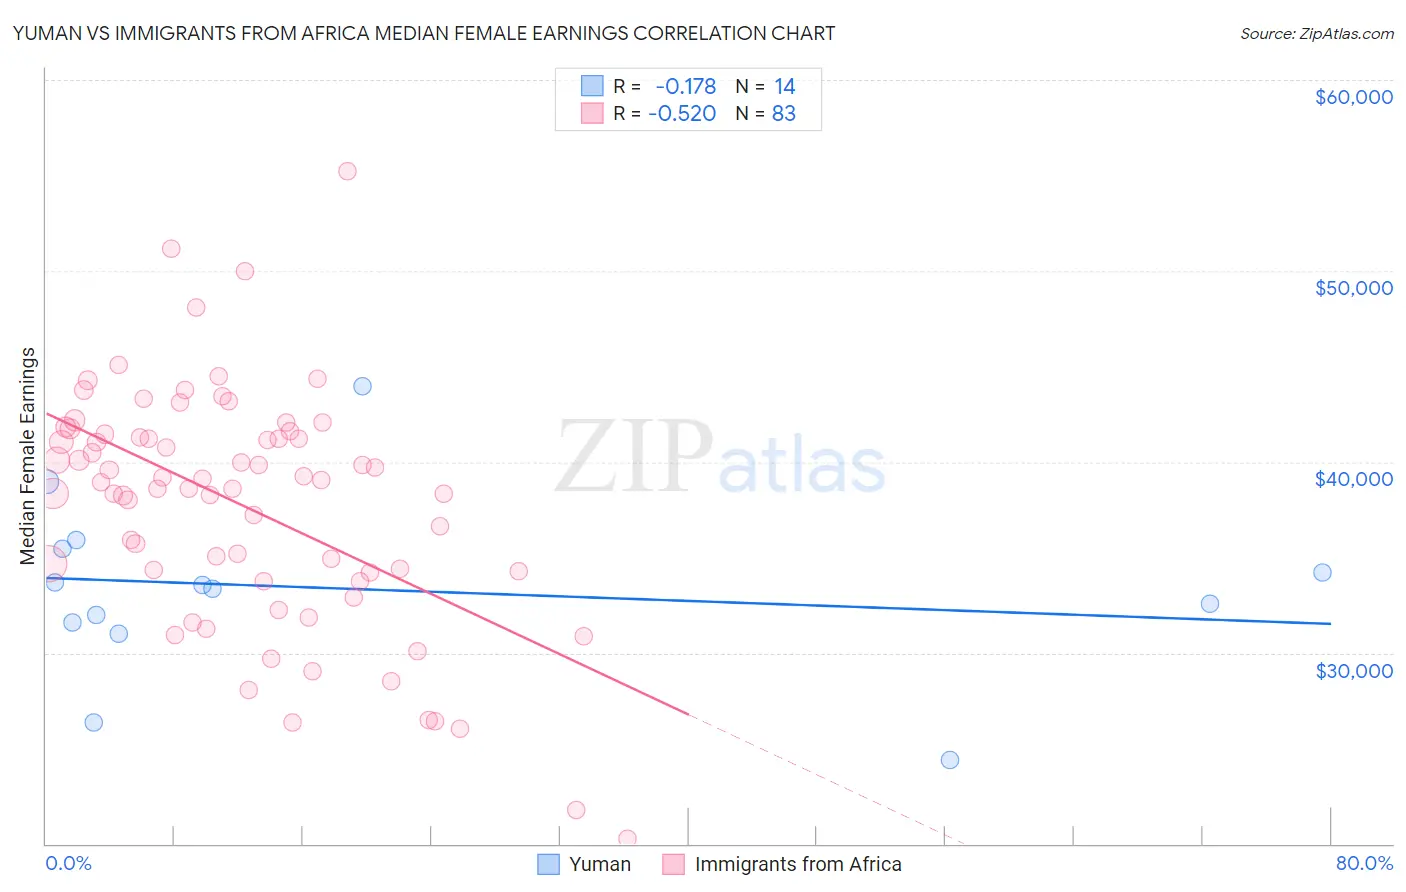 Yuman vs Immigrants from Africa Median Female Earnings